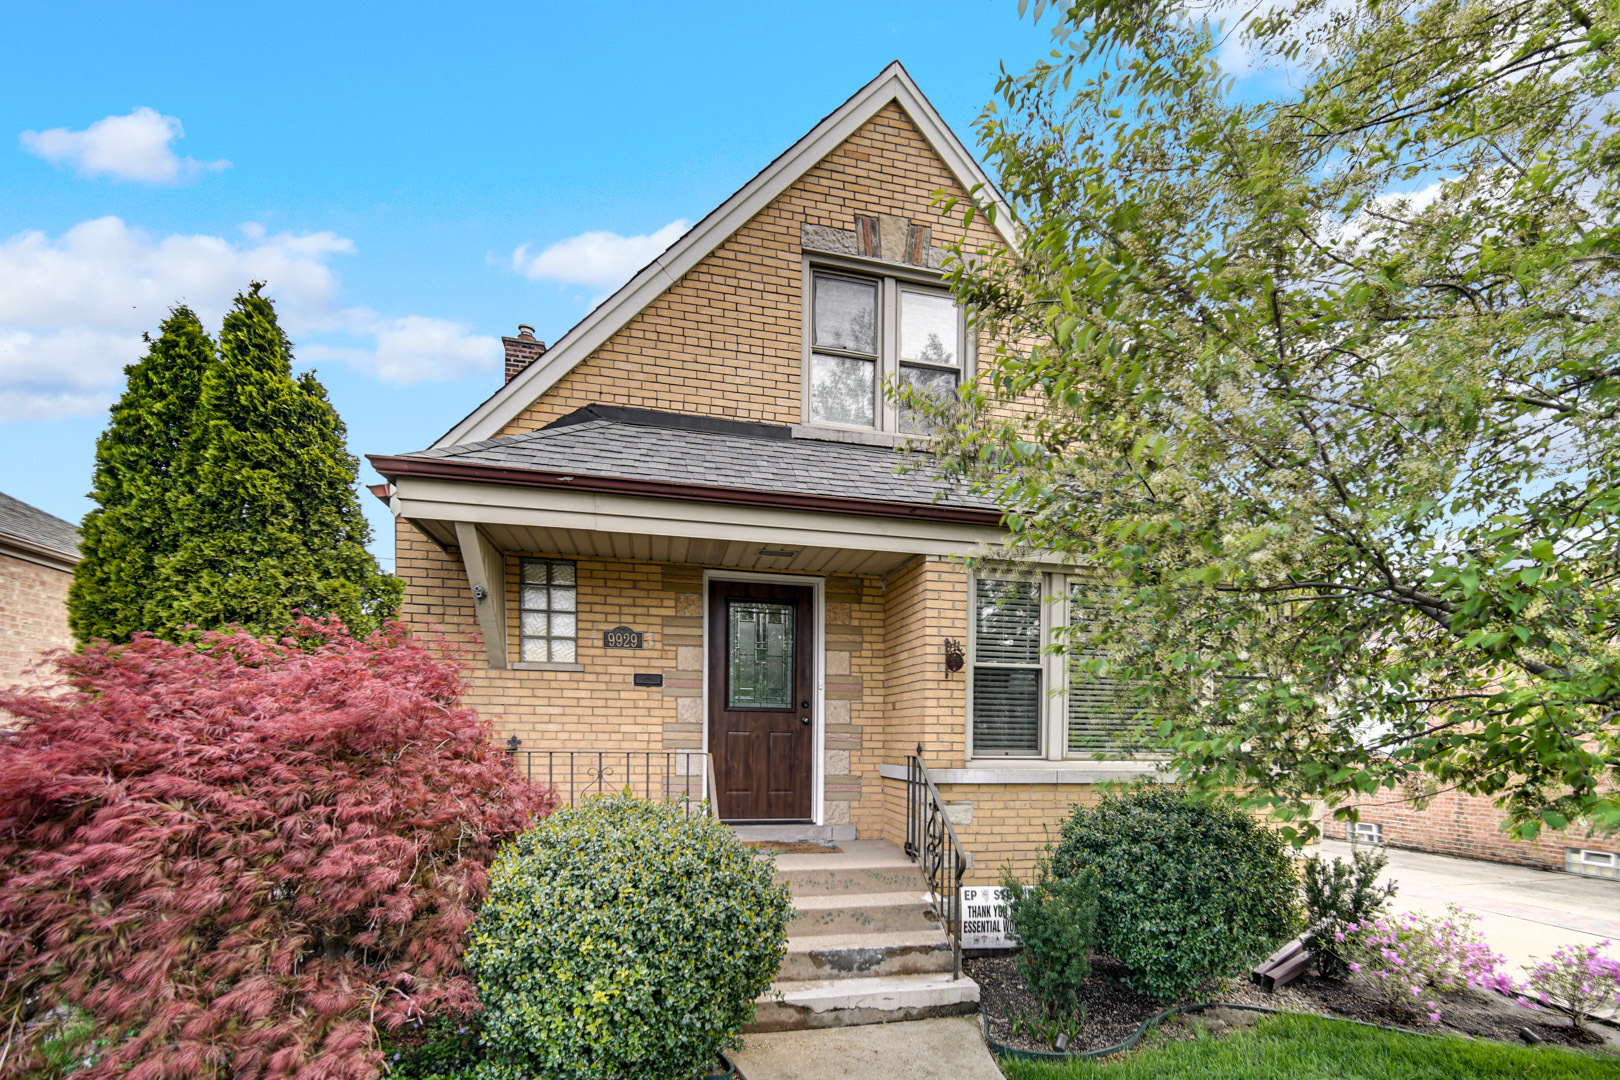 4 House in Evergreen Park